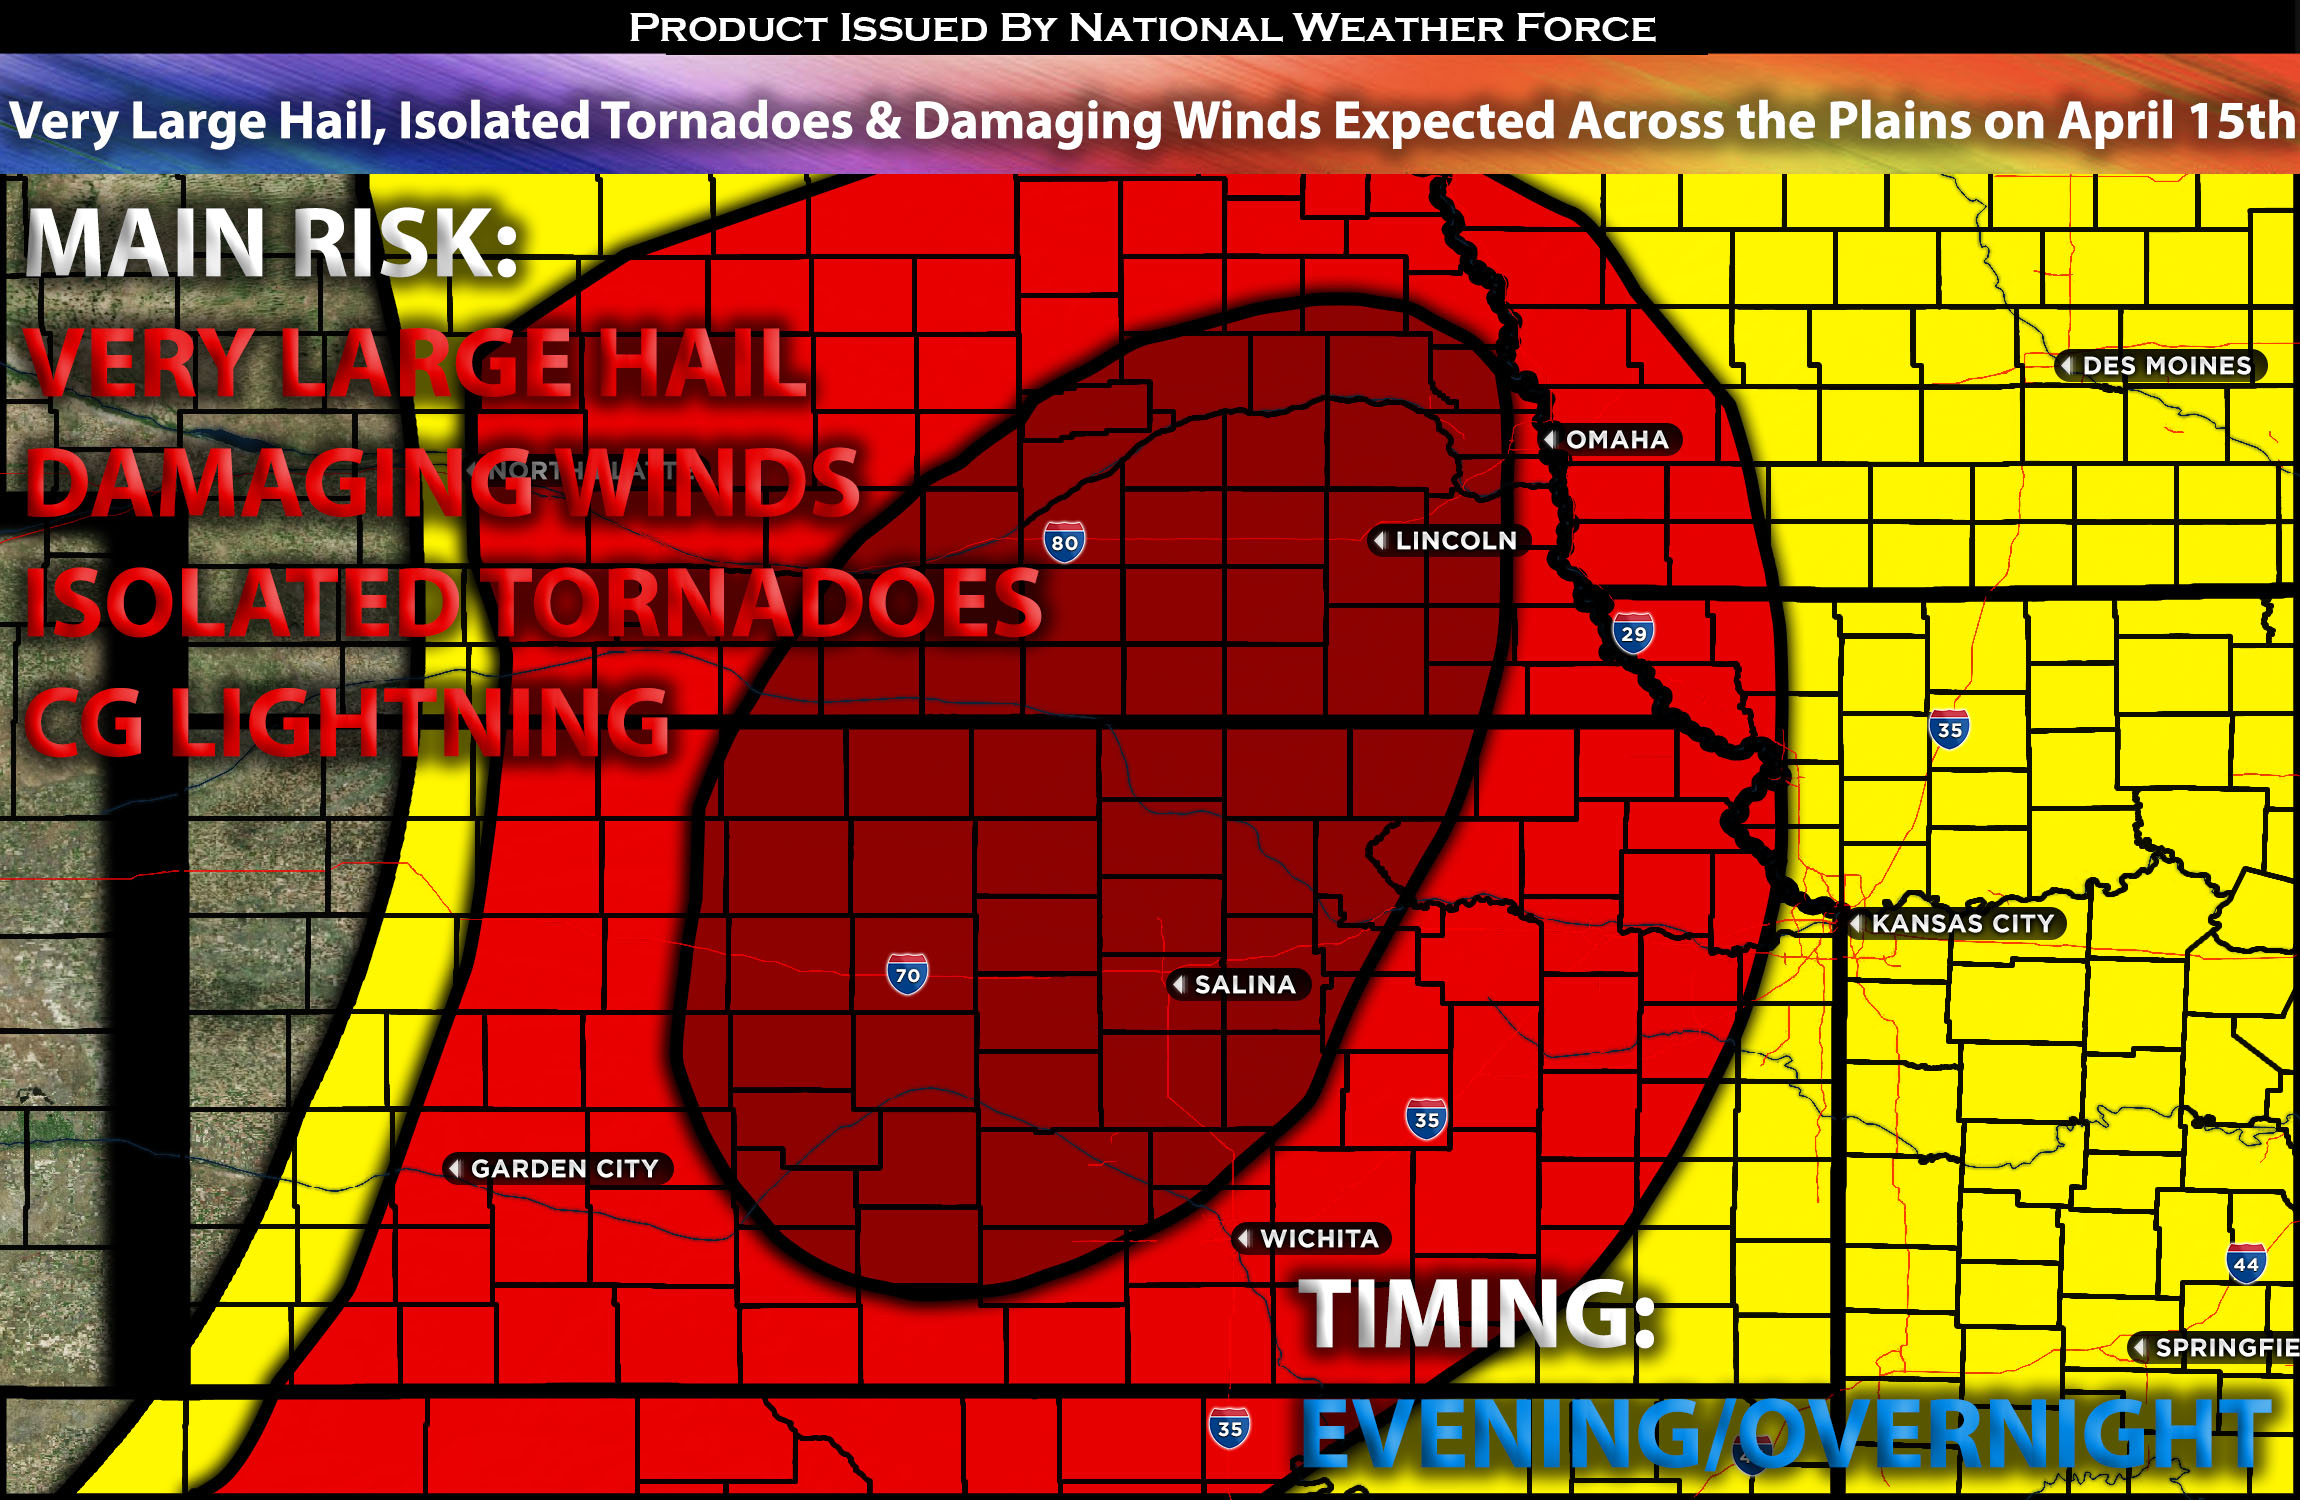 Very Large Hail, Isolated Tornadoes & Damaging Winds Expected Across the Plains on April 15th